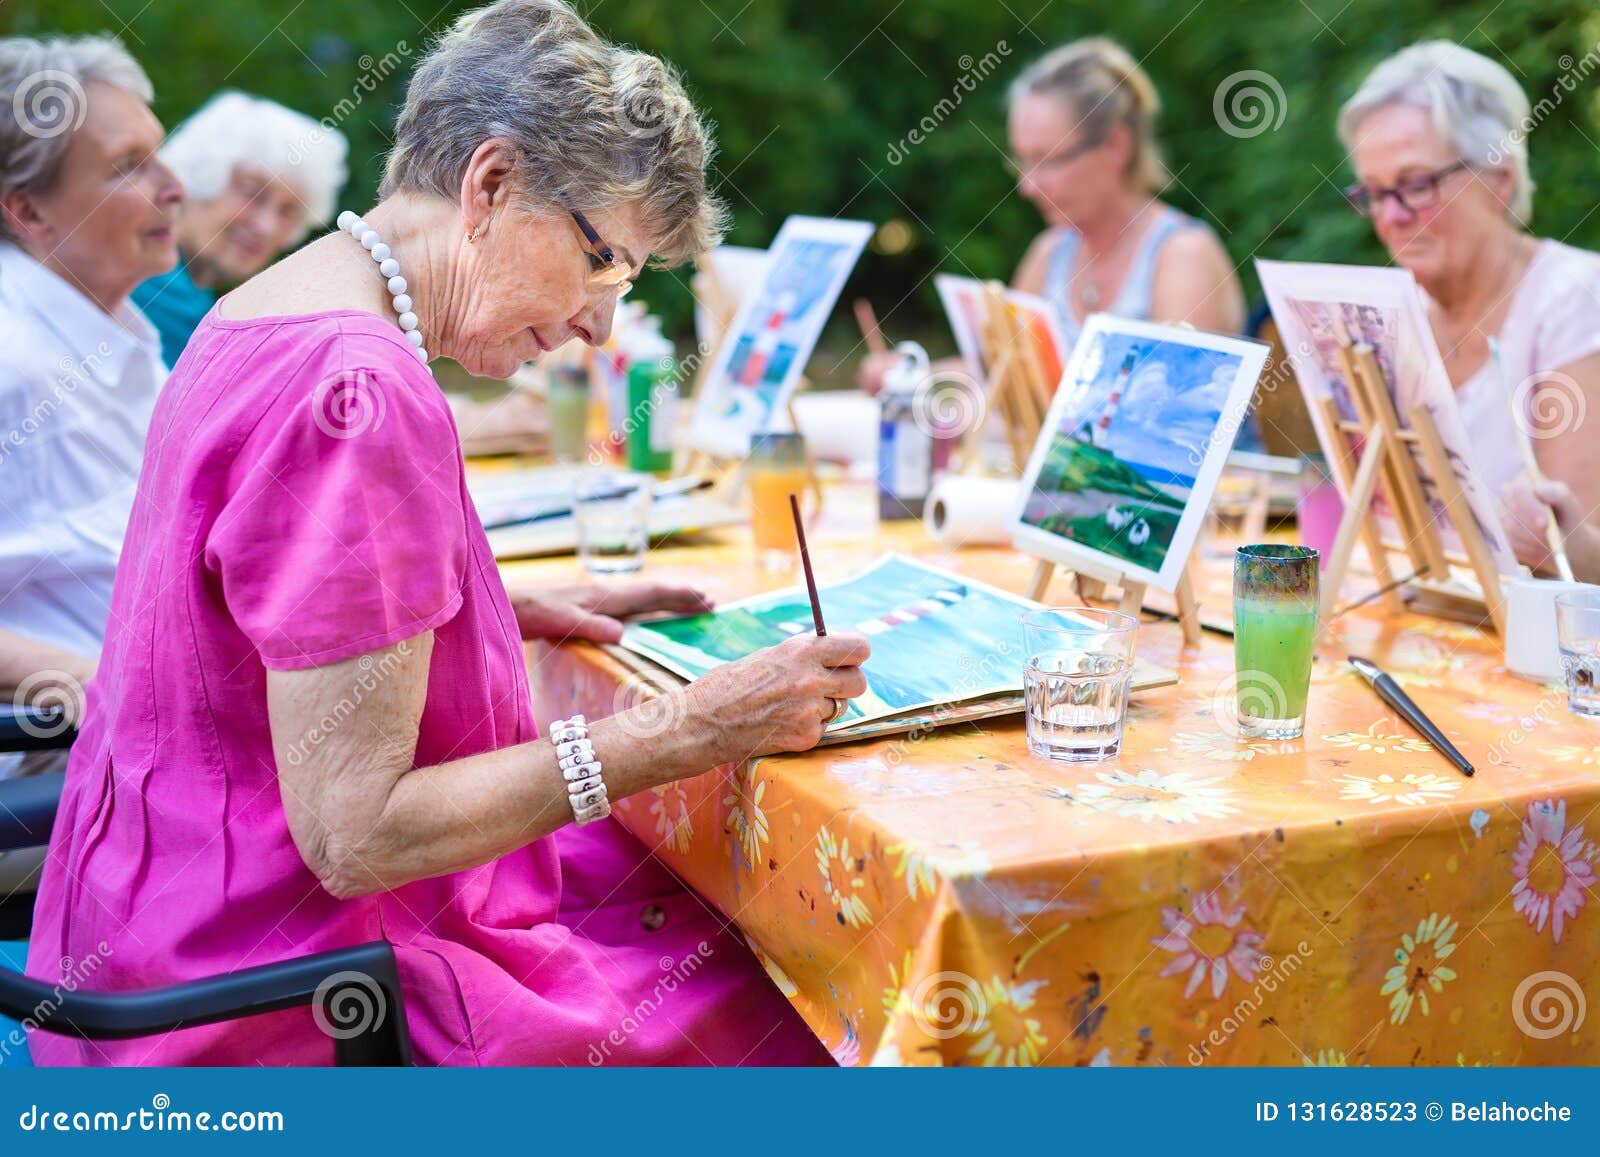 Ideas For Painting With Seniors - cclamdesigns